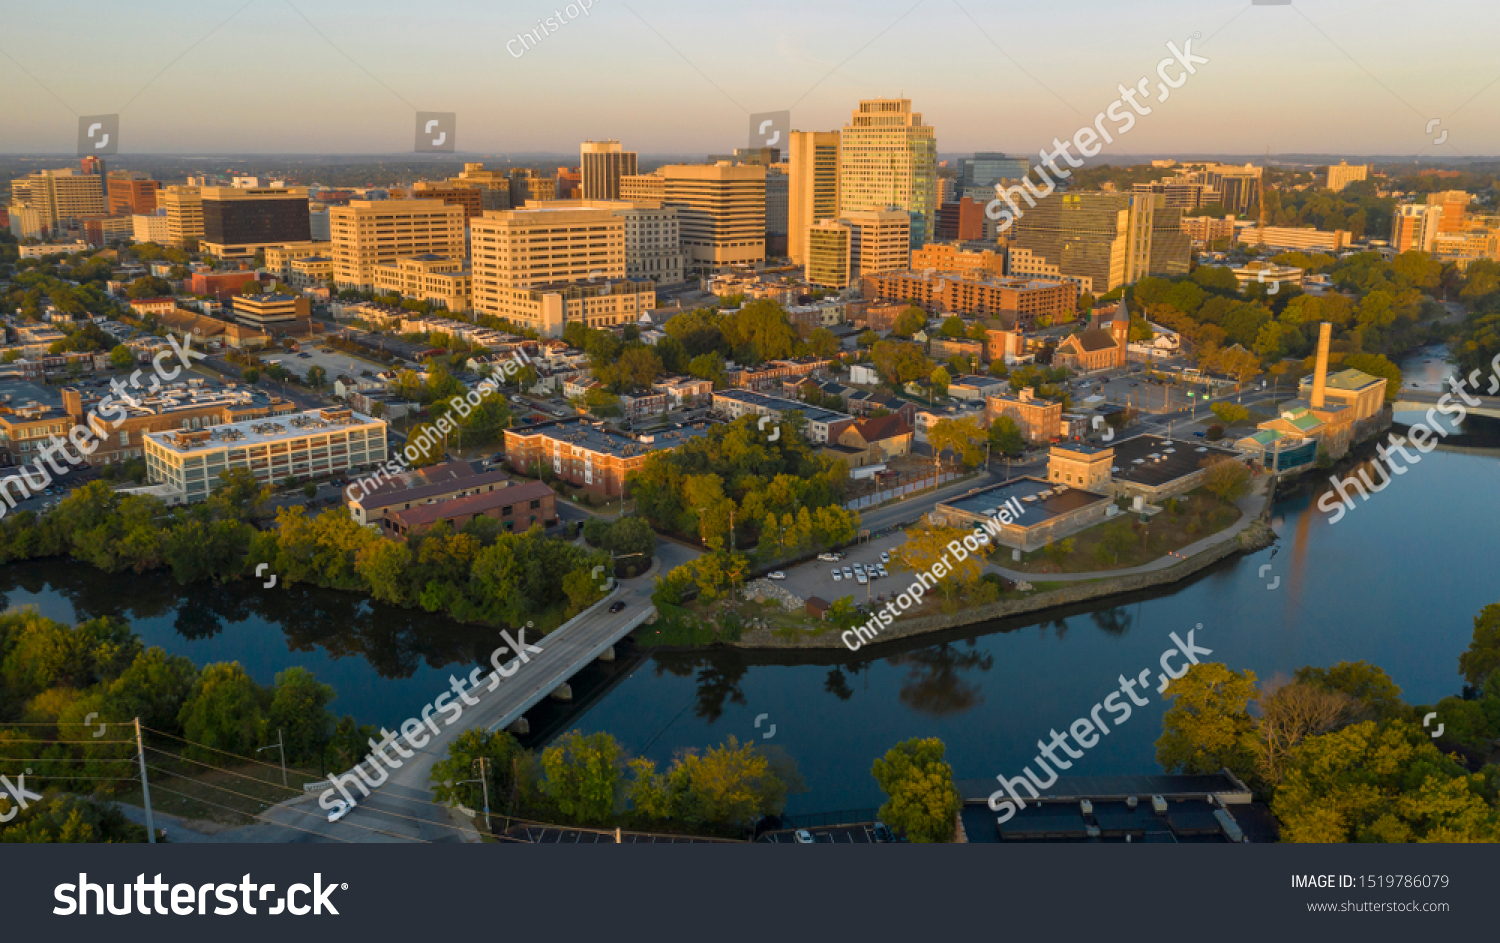 Saturated early morning light hits the buildings and architecture of downtown Wilmington Delaware #1519786079